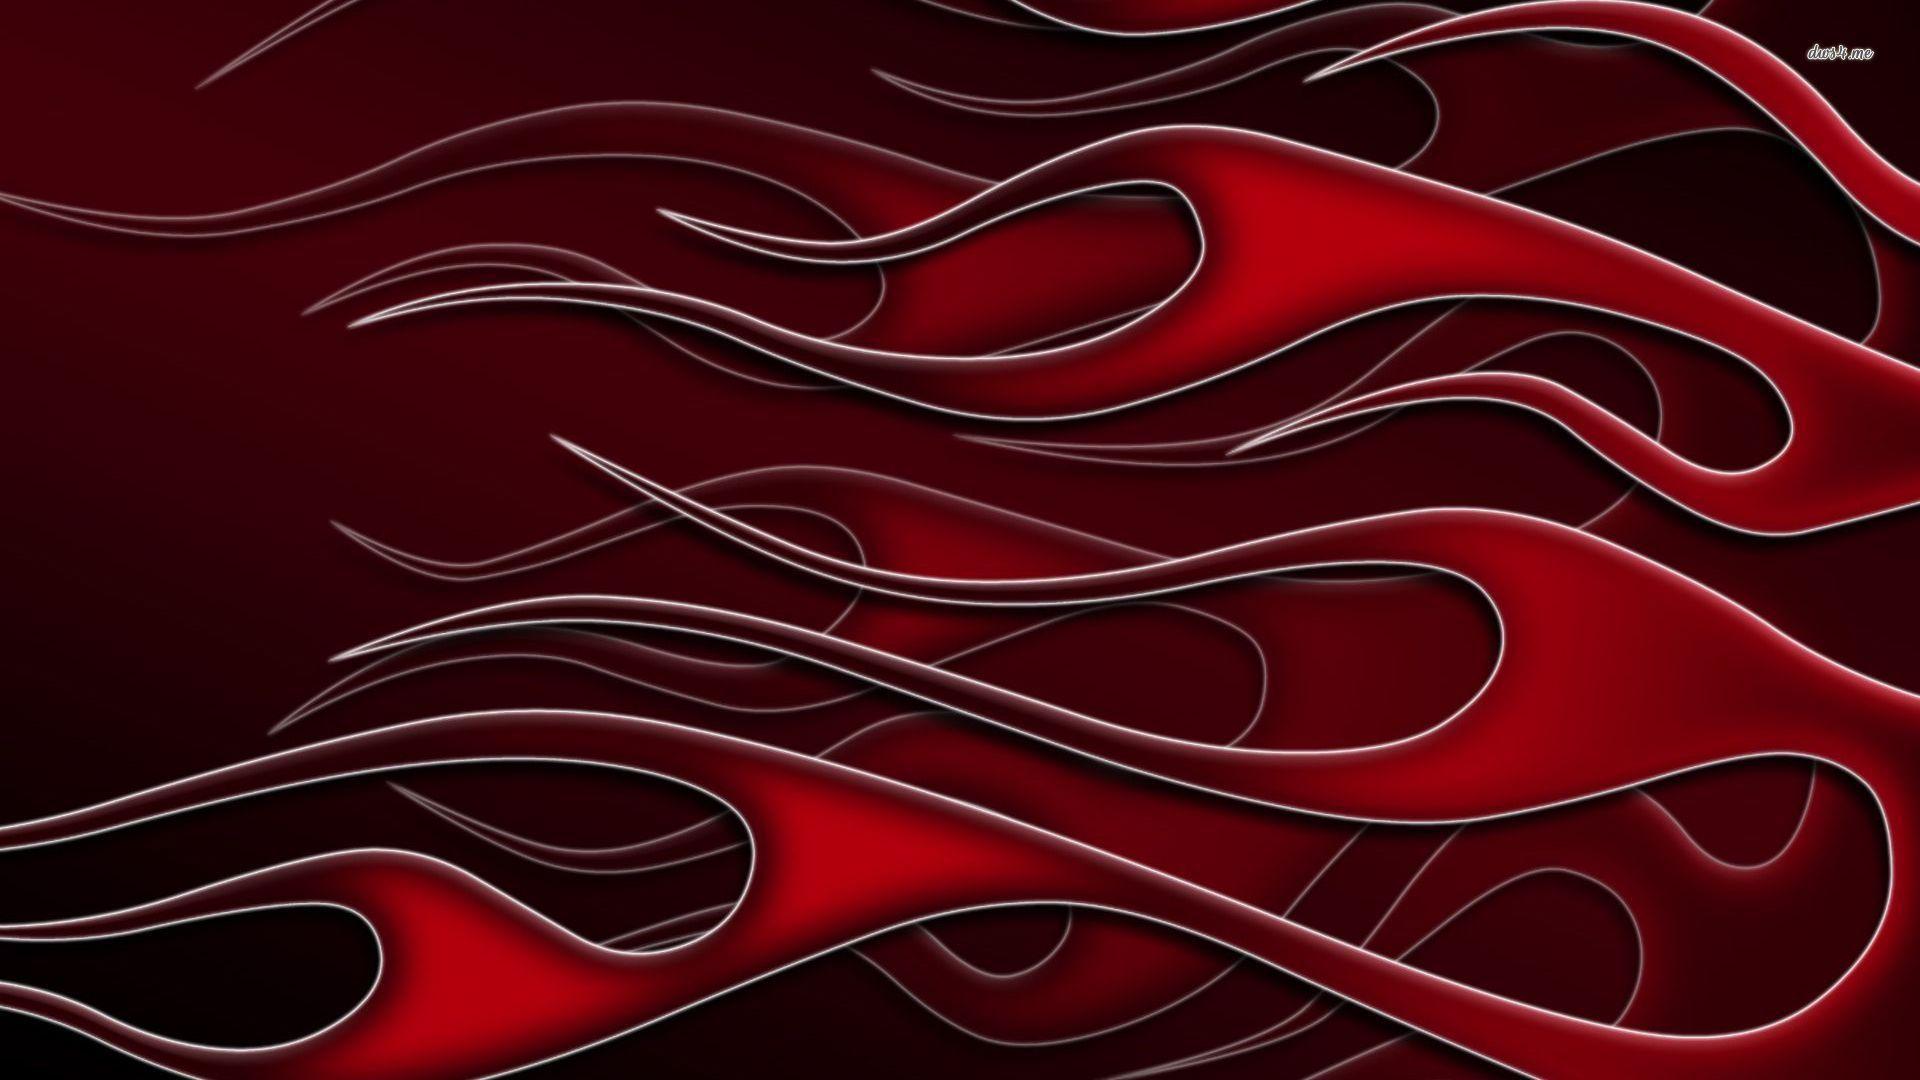 image For > Red Flames Wallpaper HD